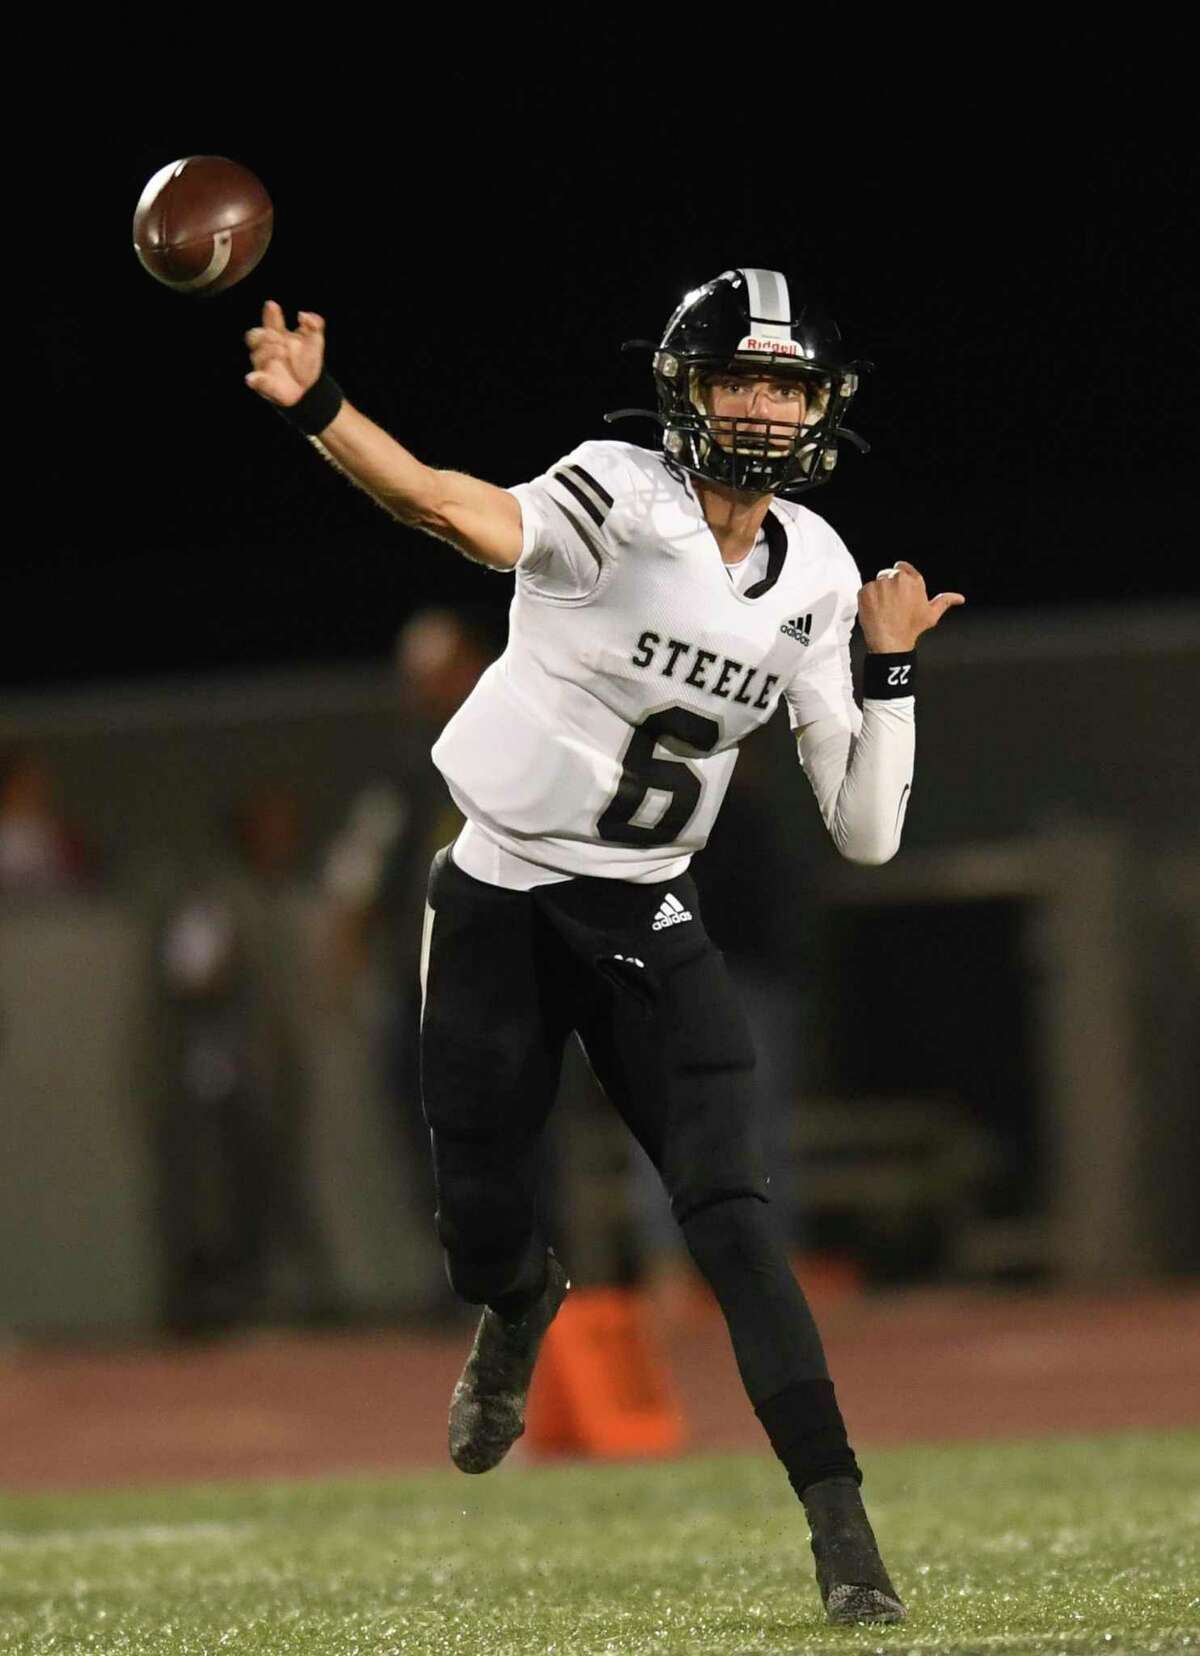 Steele quarterback Connor Vincent throws against the Judson defense during high school football action in Converse on Friday, Oct. 29, 2021. Steele on the game, 35-30.